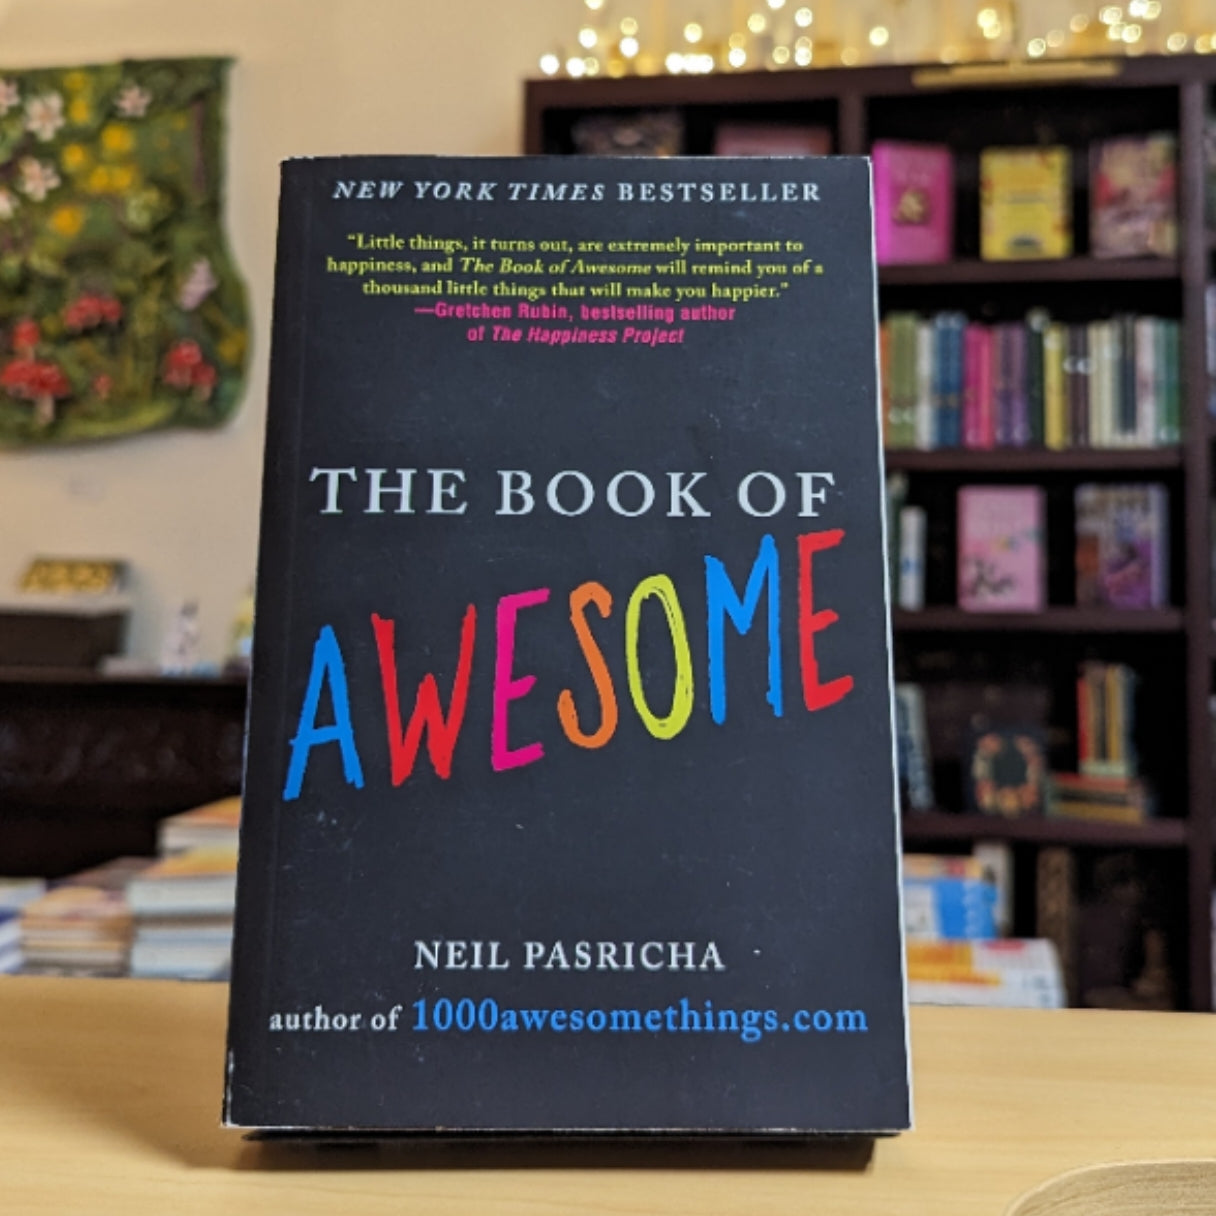 The Book of Awesome: Snow Days, Bakery Air, Finding Money in Your Pocket, and Other Simple, Brilliant Things (The Book of Awesome Series)